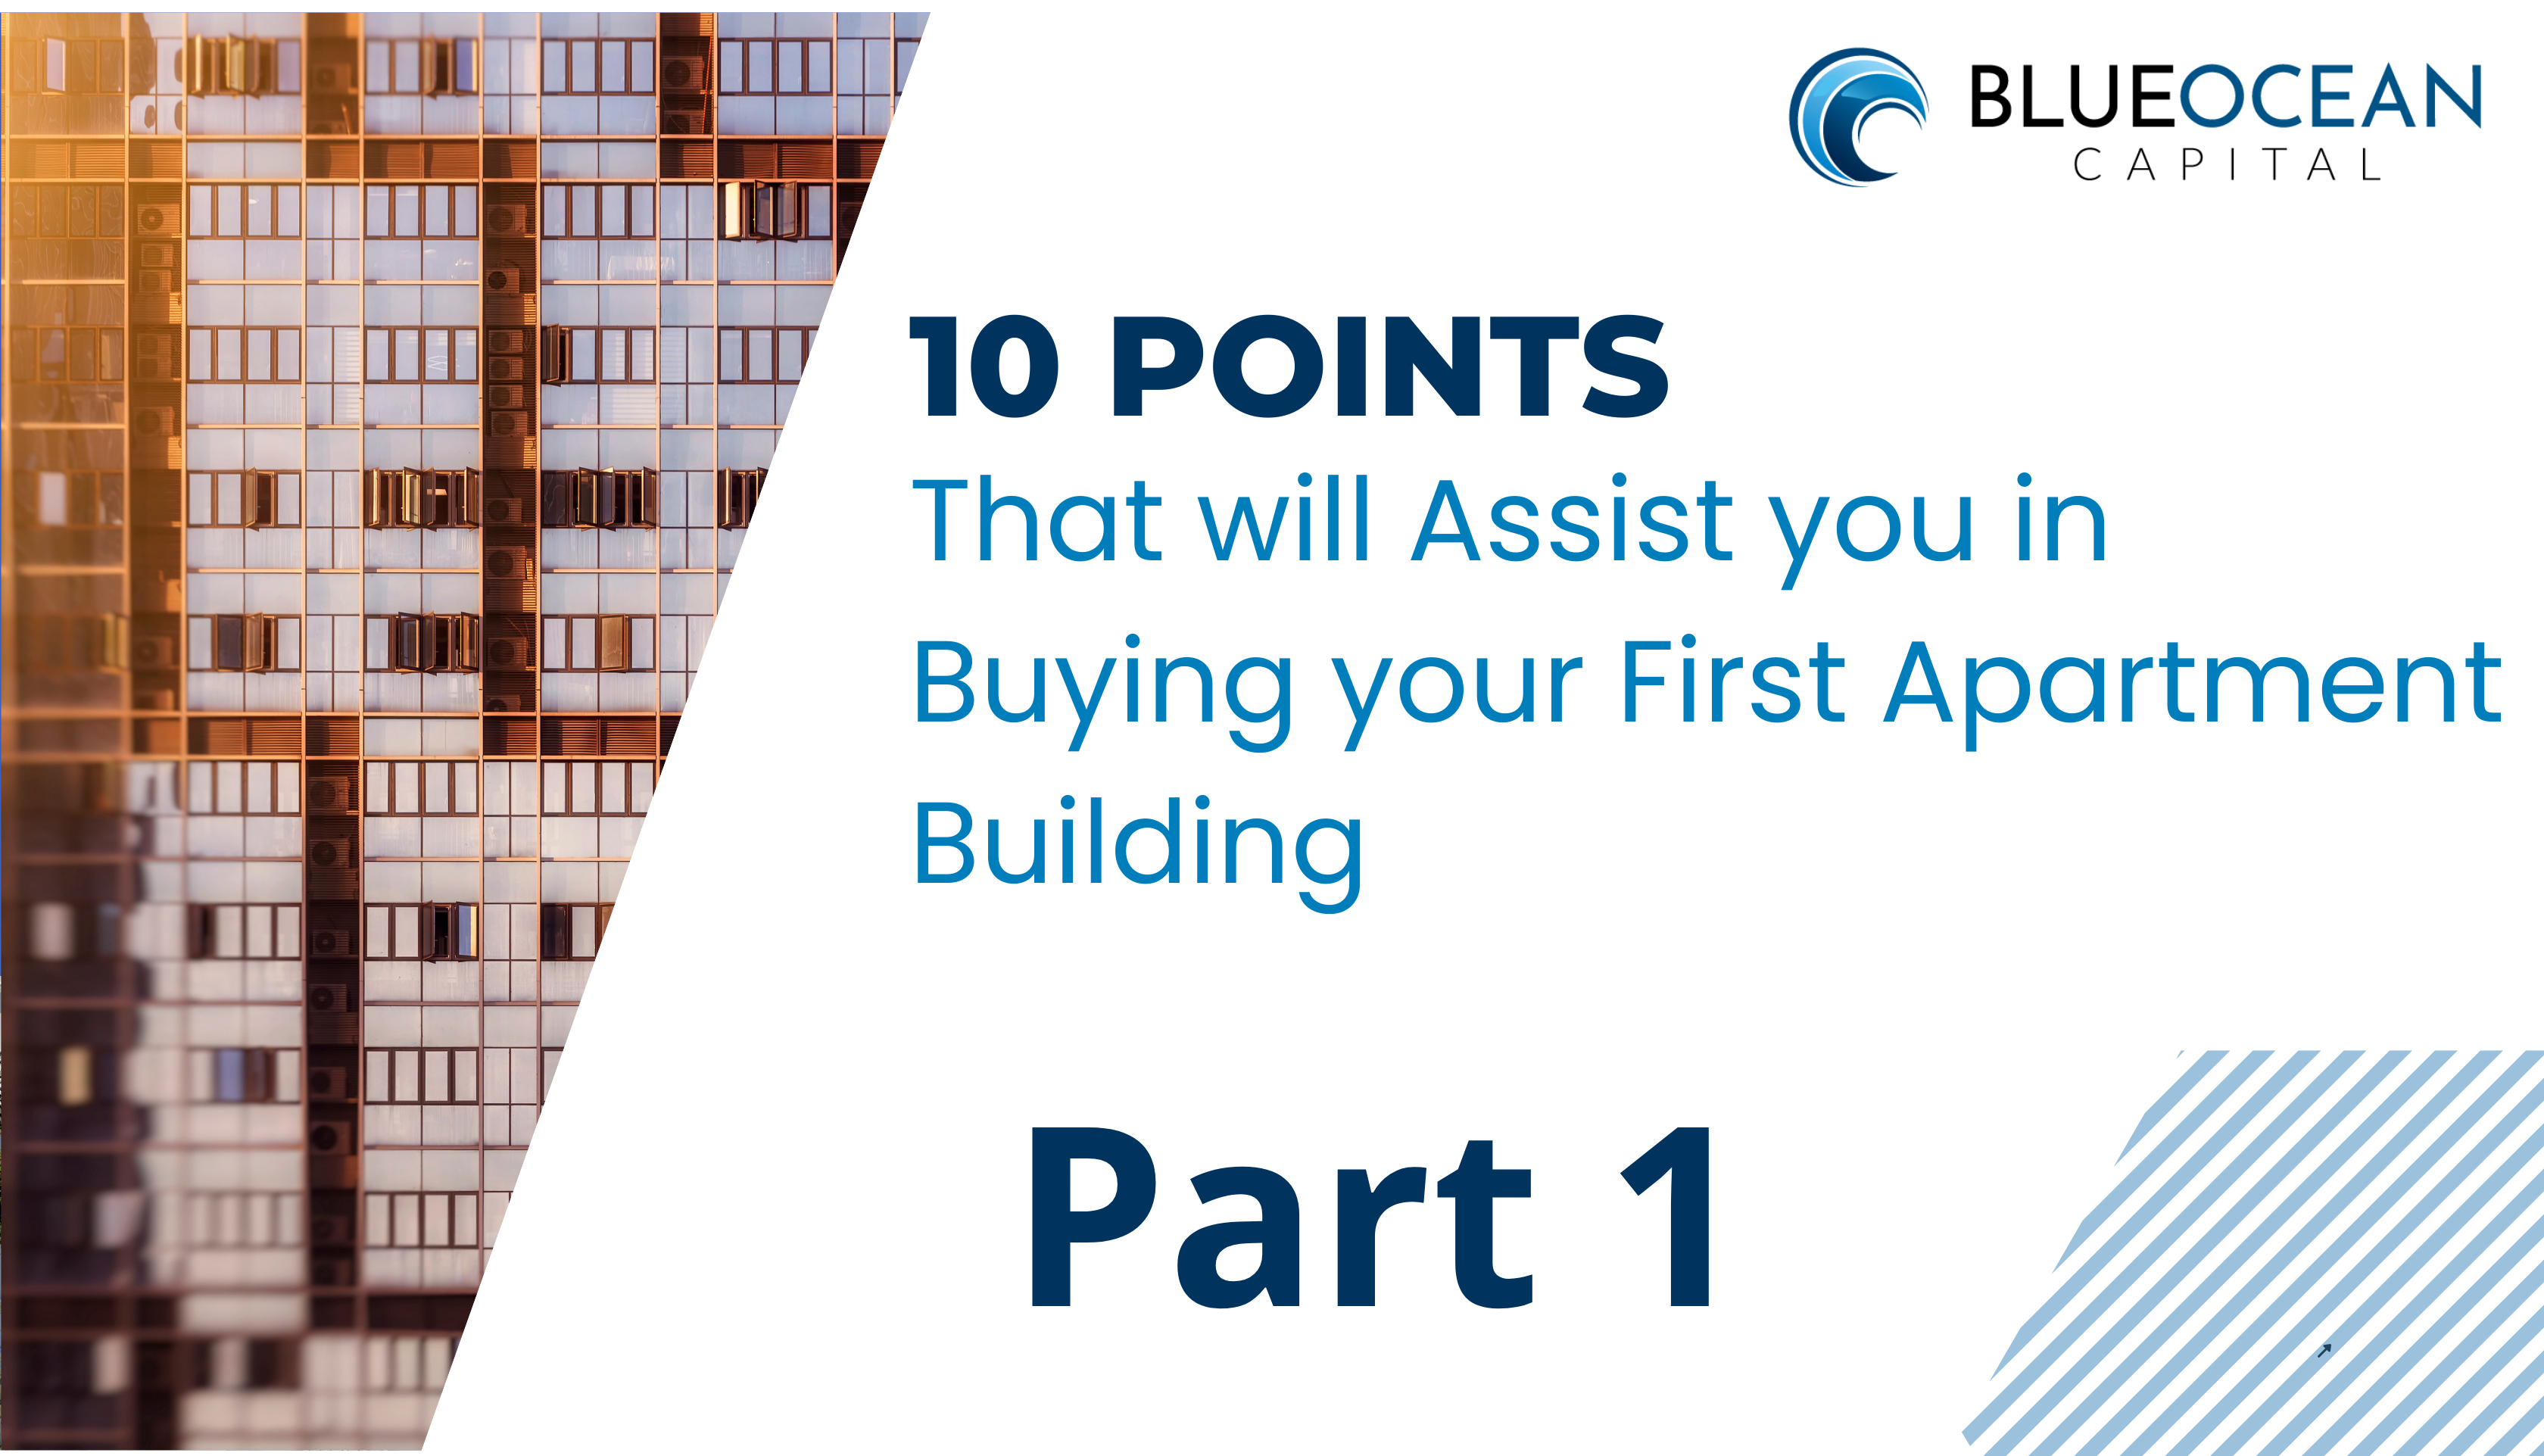 10 points that will assist you in buying your First Apartment Building- Part 1